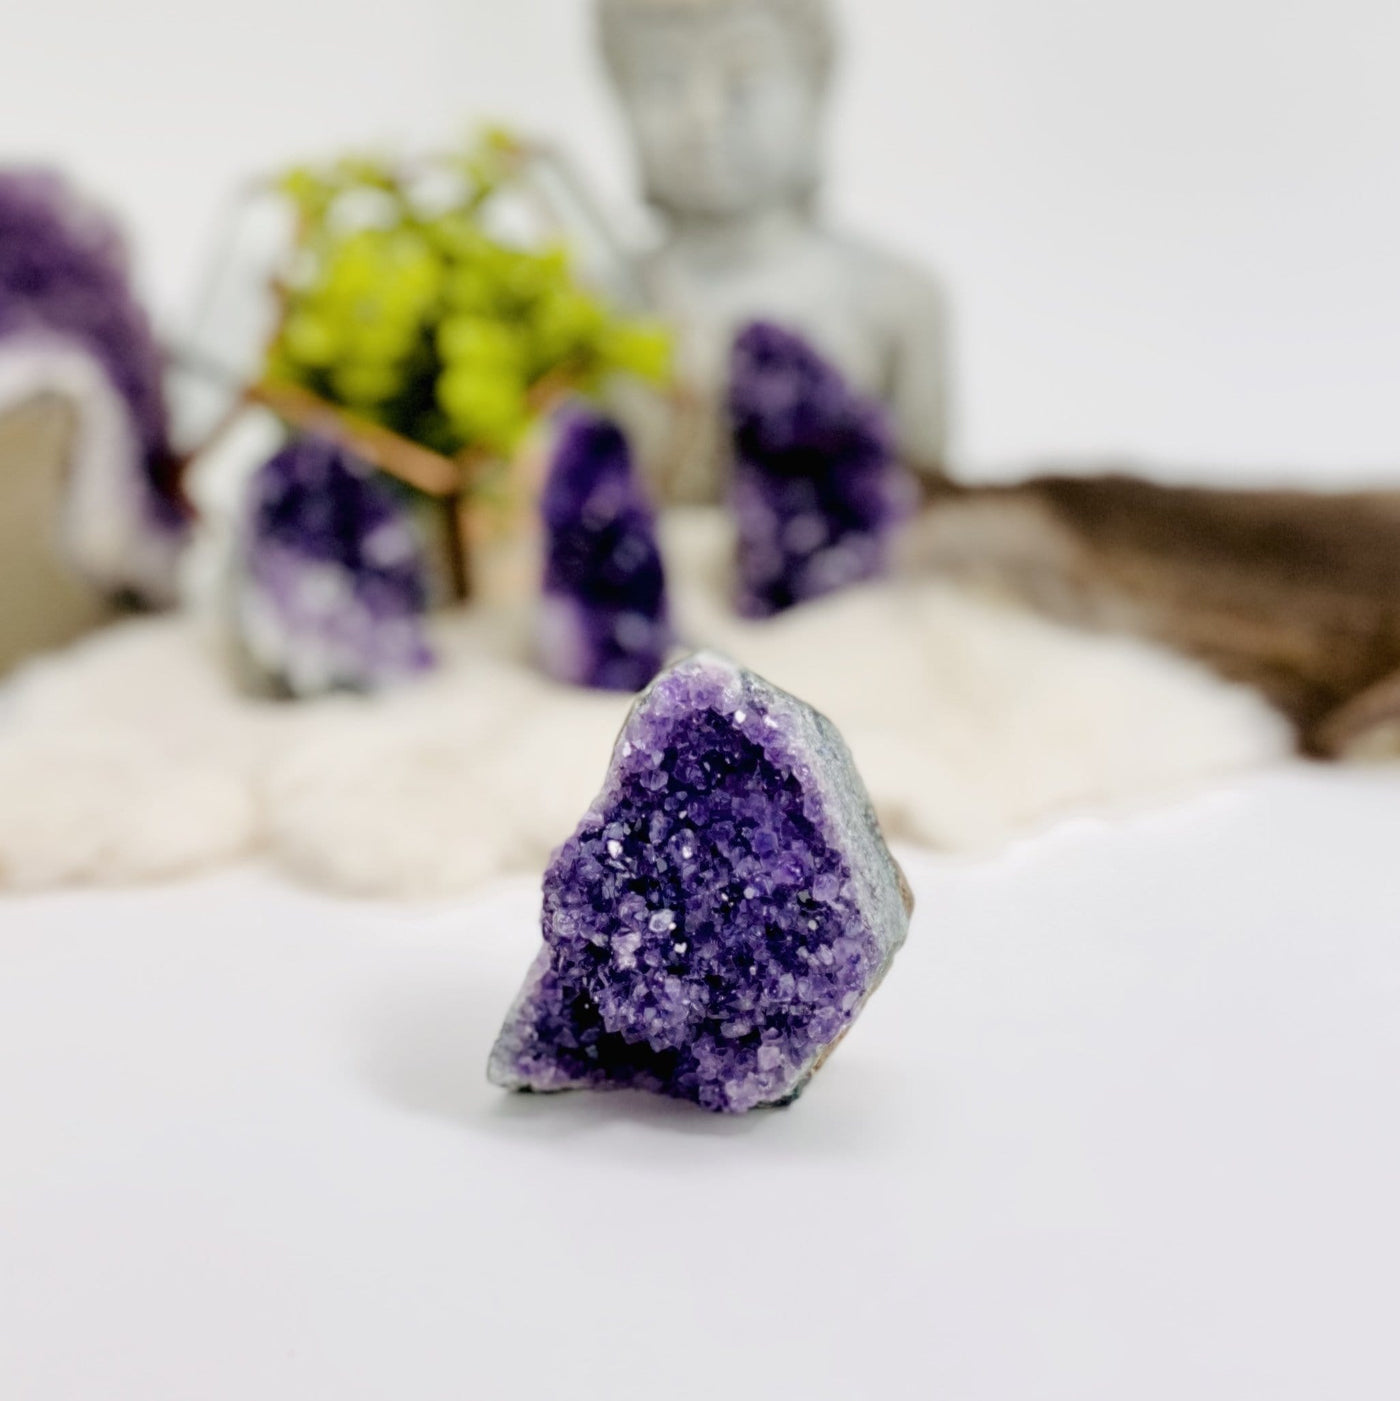 Amethyst Cluster Geode Crystal Cut Base displayed up close to view cluster details